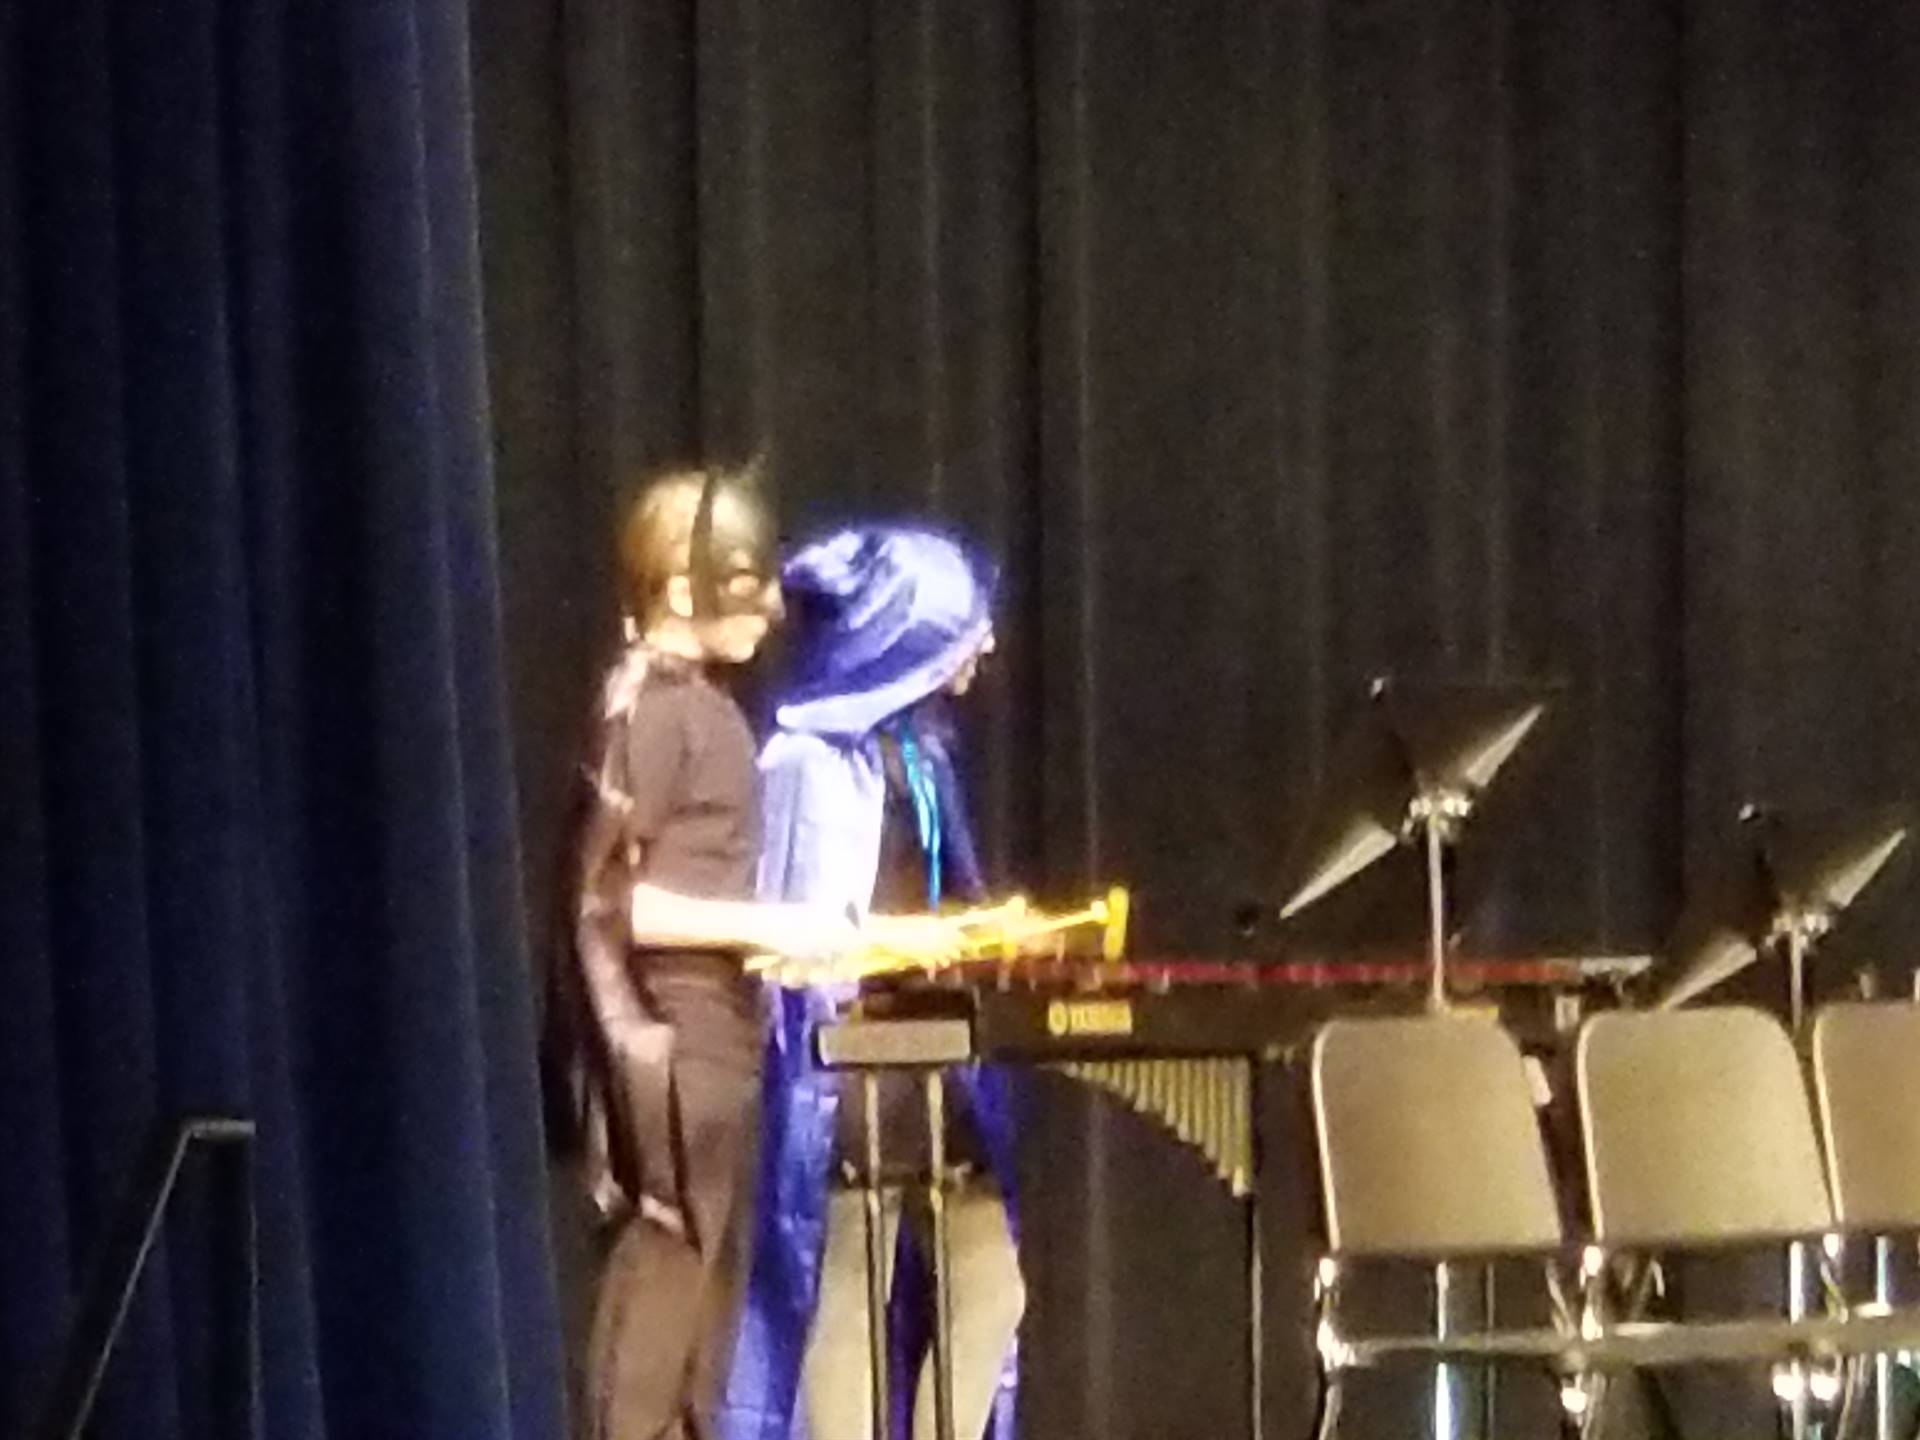 Batman theme song by 8th grade percussion